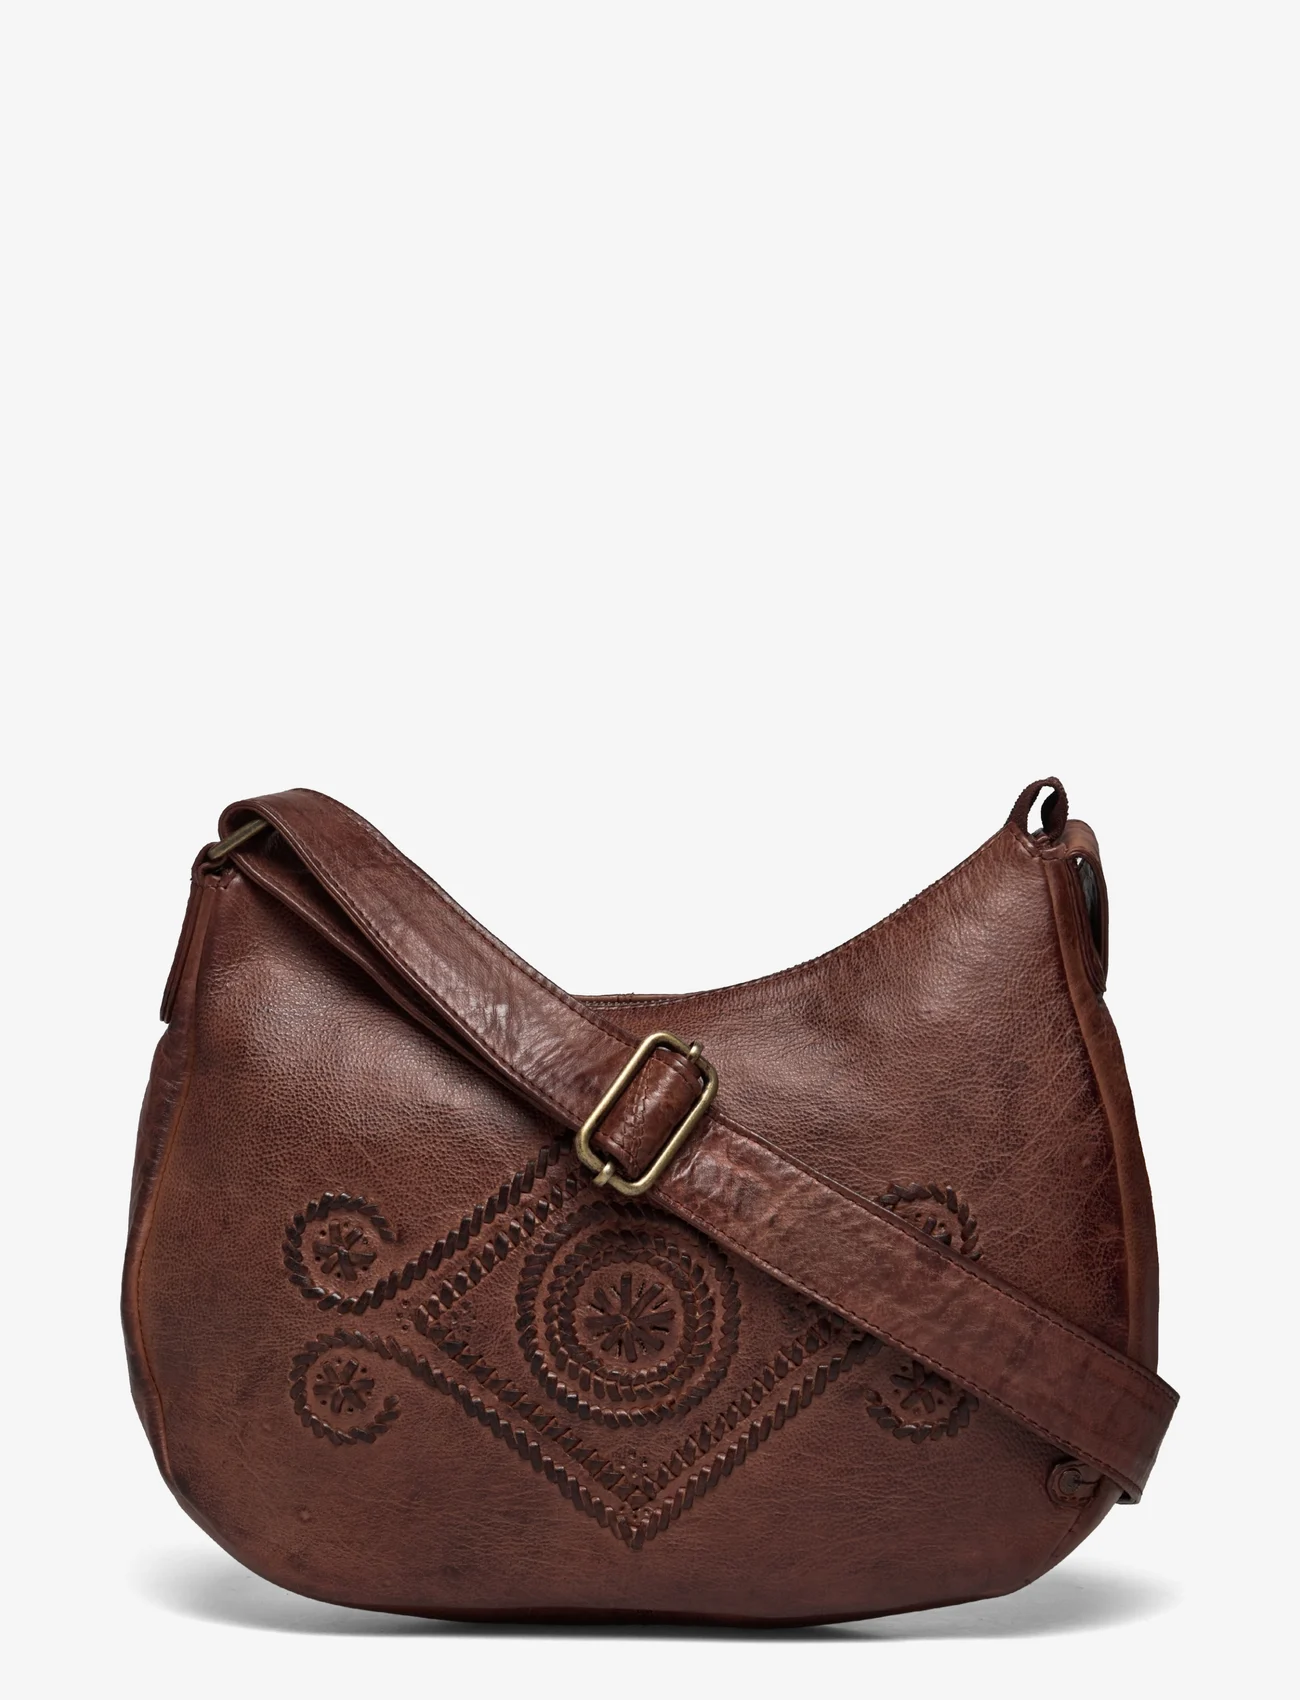 DEPECHE - Shoulderbag - party wear at outlet prices - 133 brandy - 0